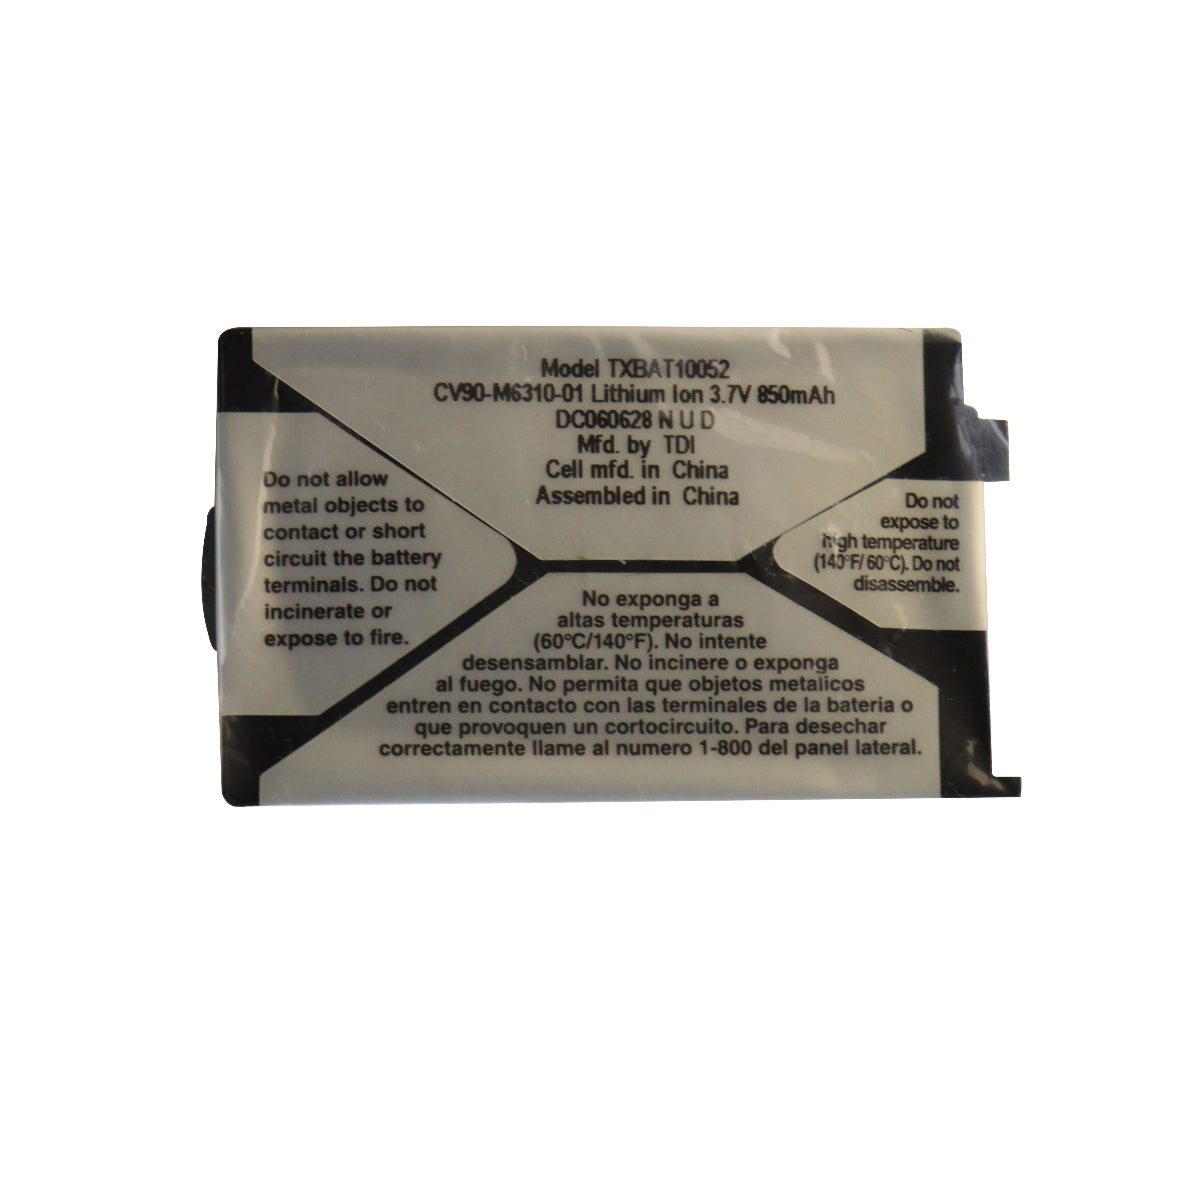 Kyocera Rechargeable (850mAh) OEM Battery (TXBAT10052) for Rave K10 Royale Cell Phone - Batteries Kyocera    - Simple Cell Bulk Wholesale Pricing - USA Seller